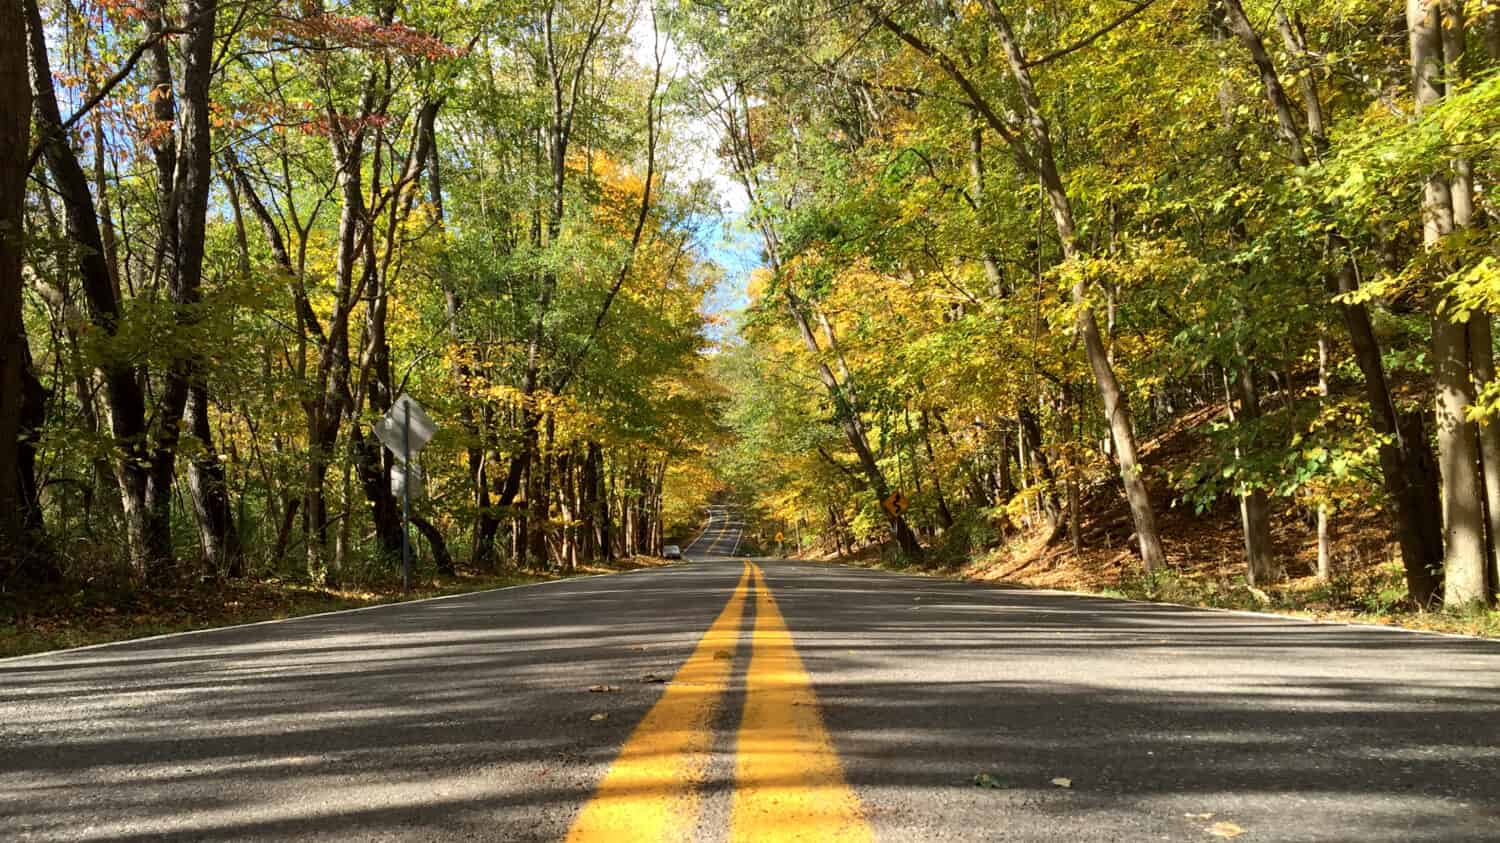 A two lane country road in Ohio during fall as leaves turn from green to yellow, orange and brown.